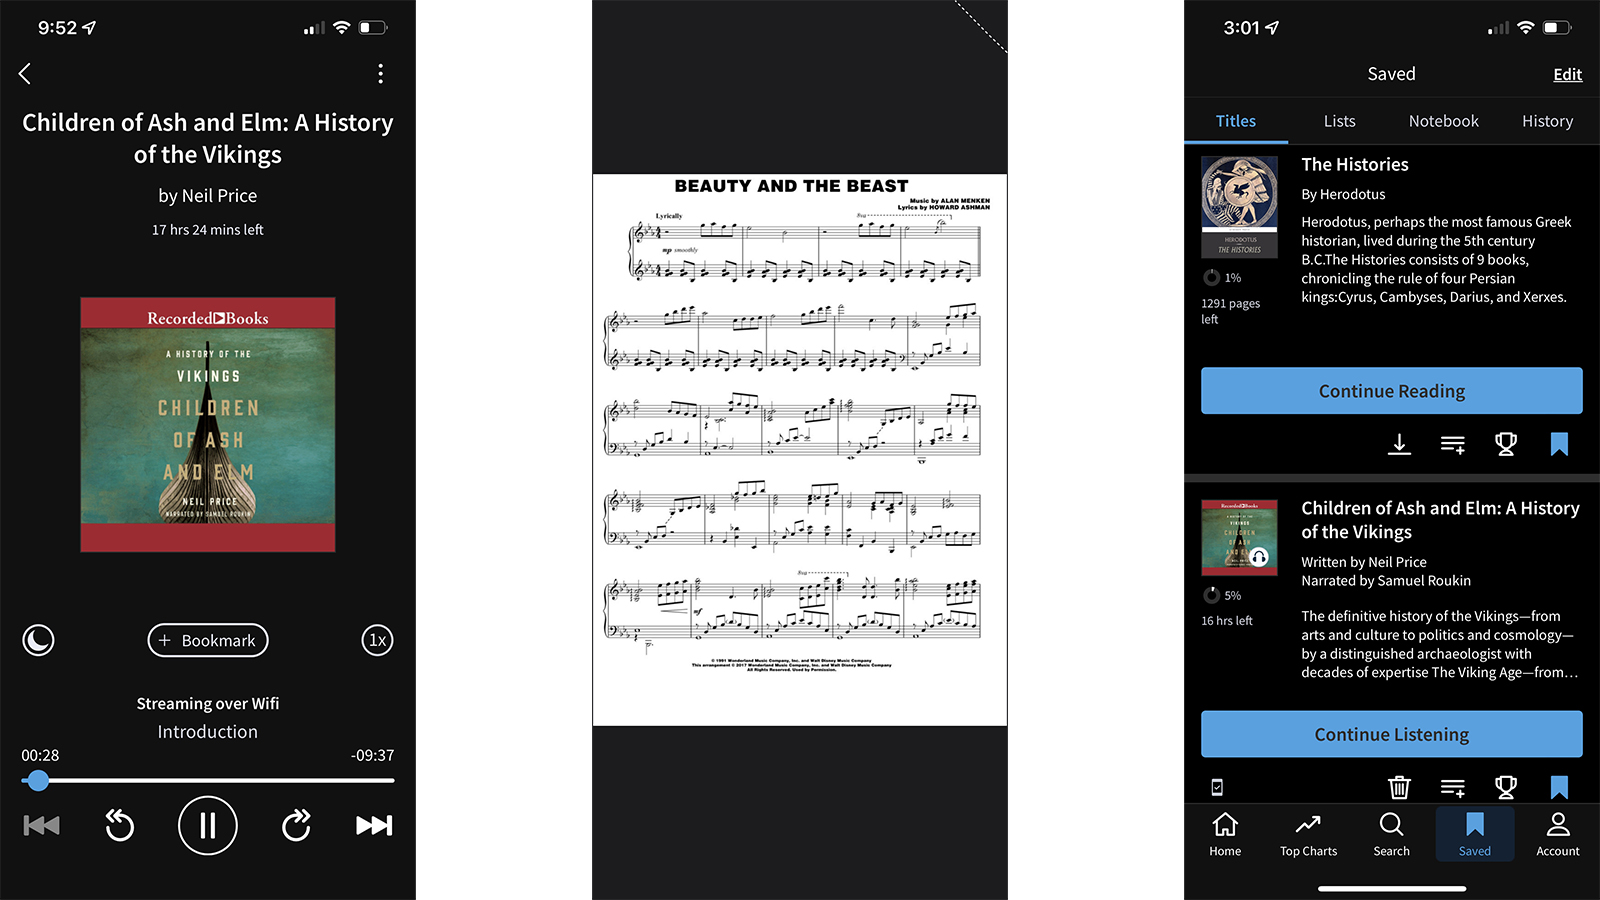 Scribd's mobile interface showing audiobooks, saved titles and sheet music